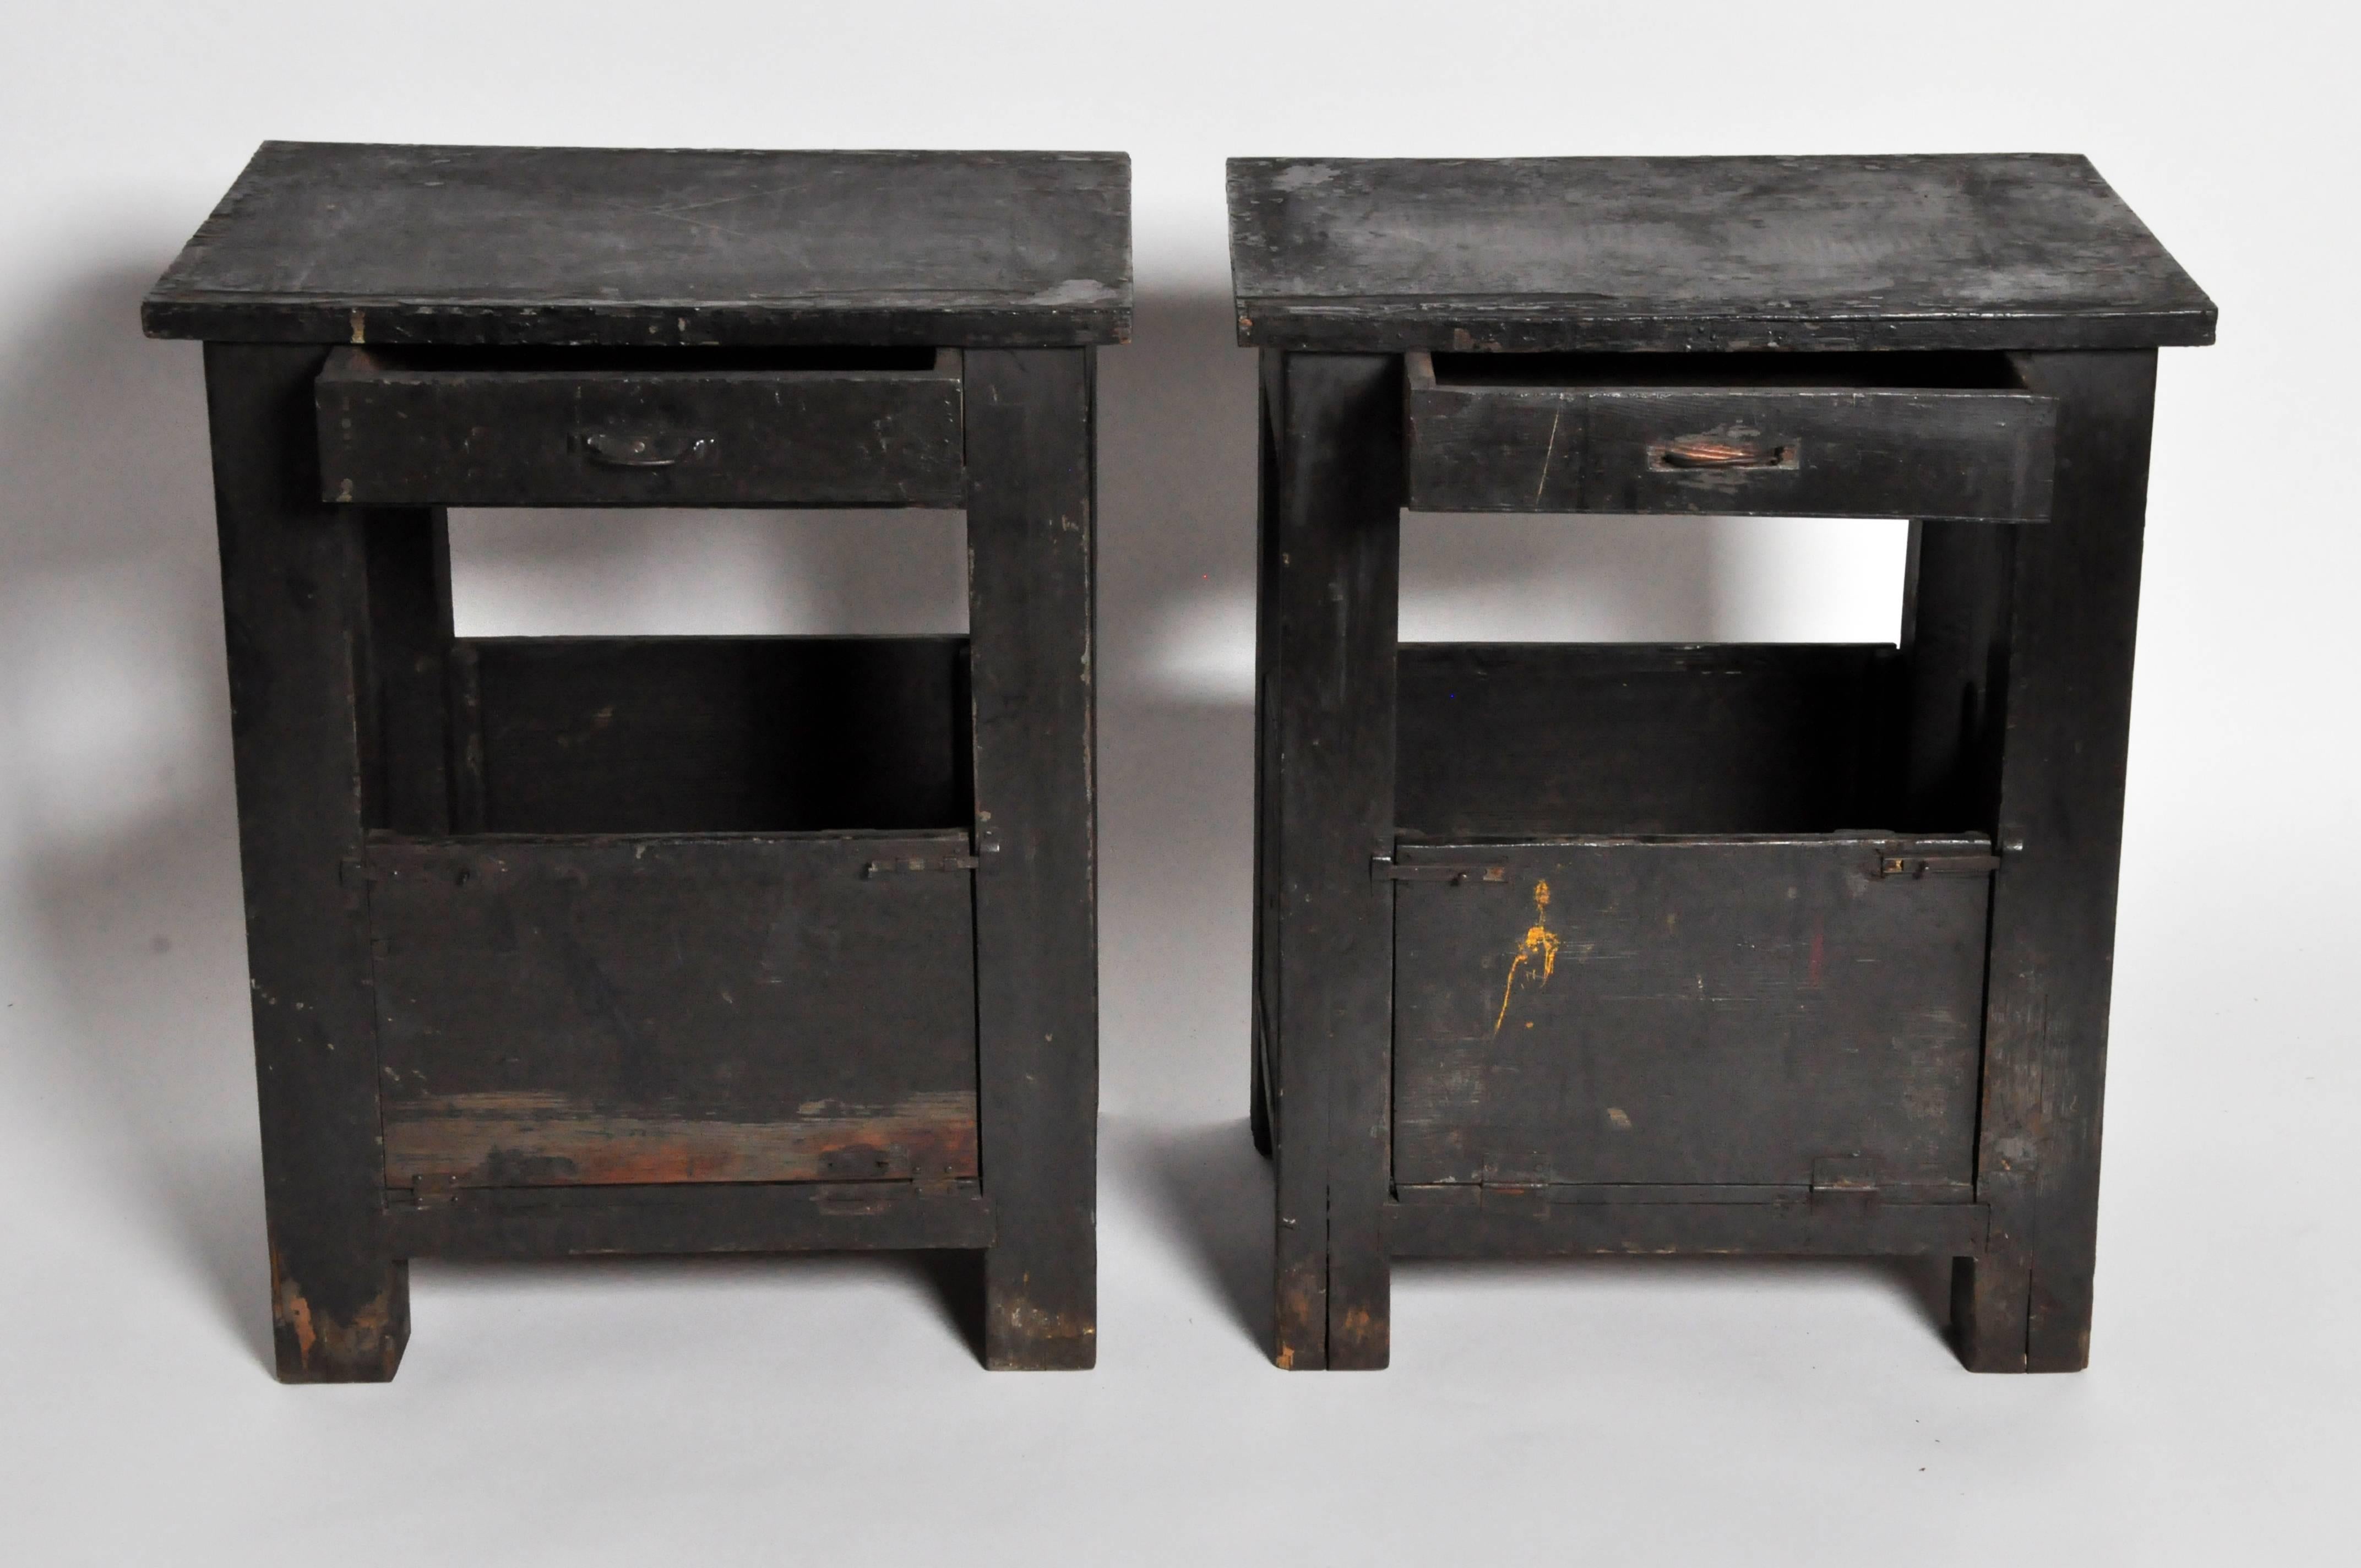 This rustic pair of bedside tables is from France and is made from pinewood and black paint, late 1800s. It features a drawer and bottom storage compartment that opens up.